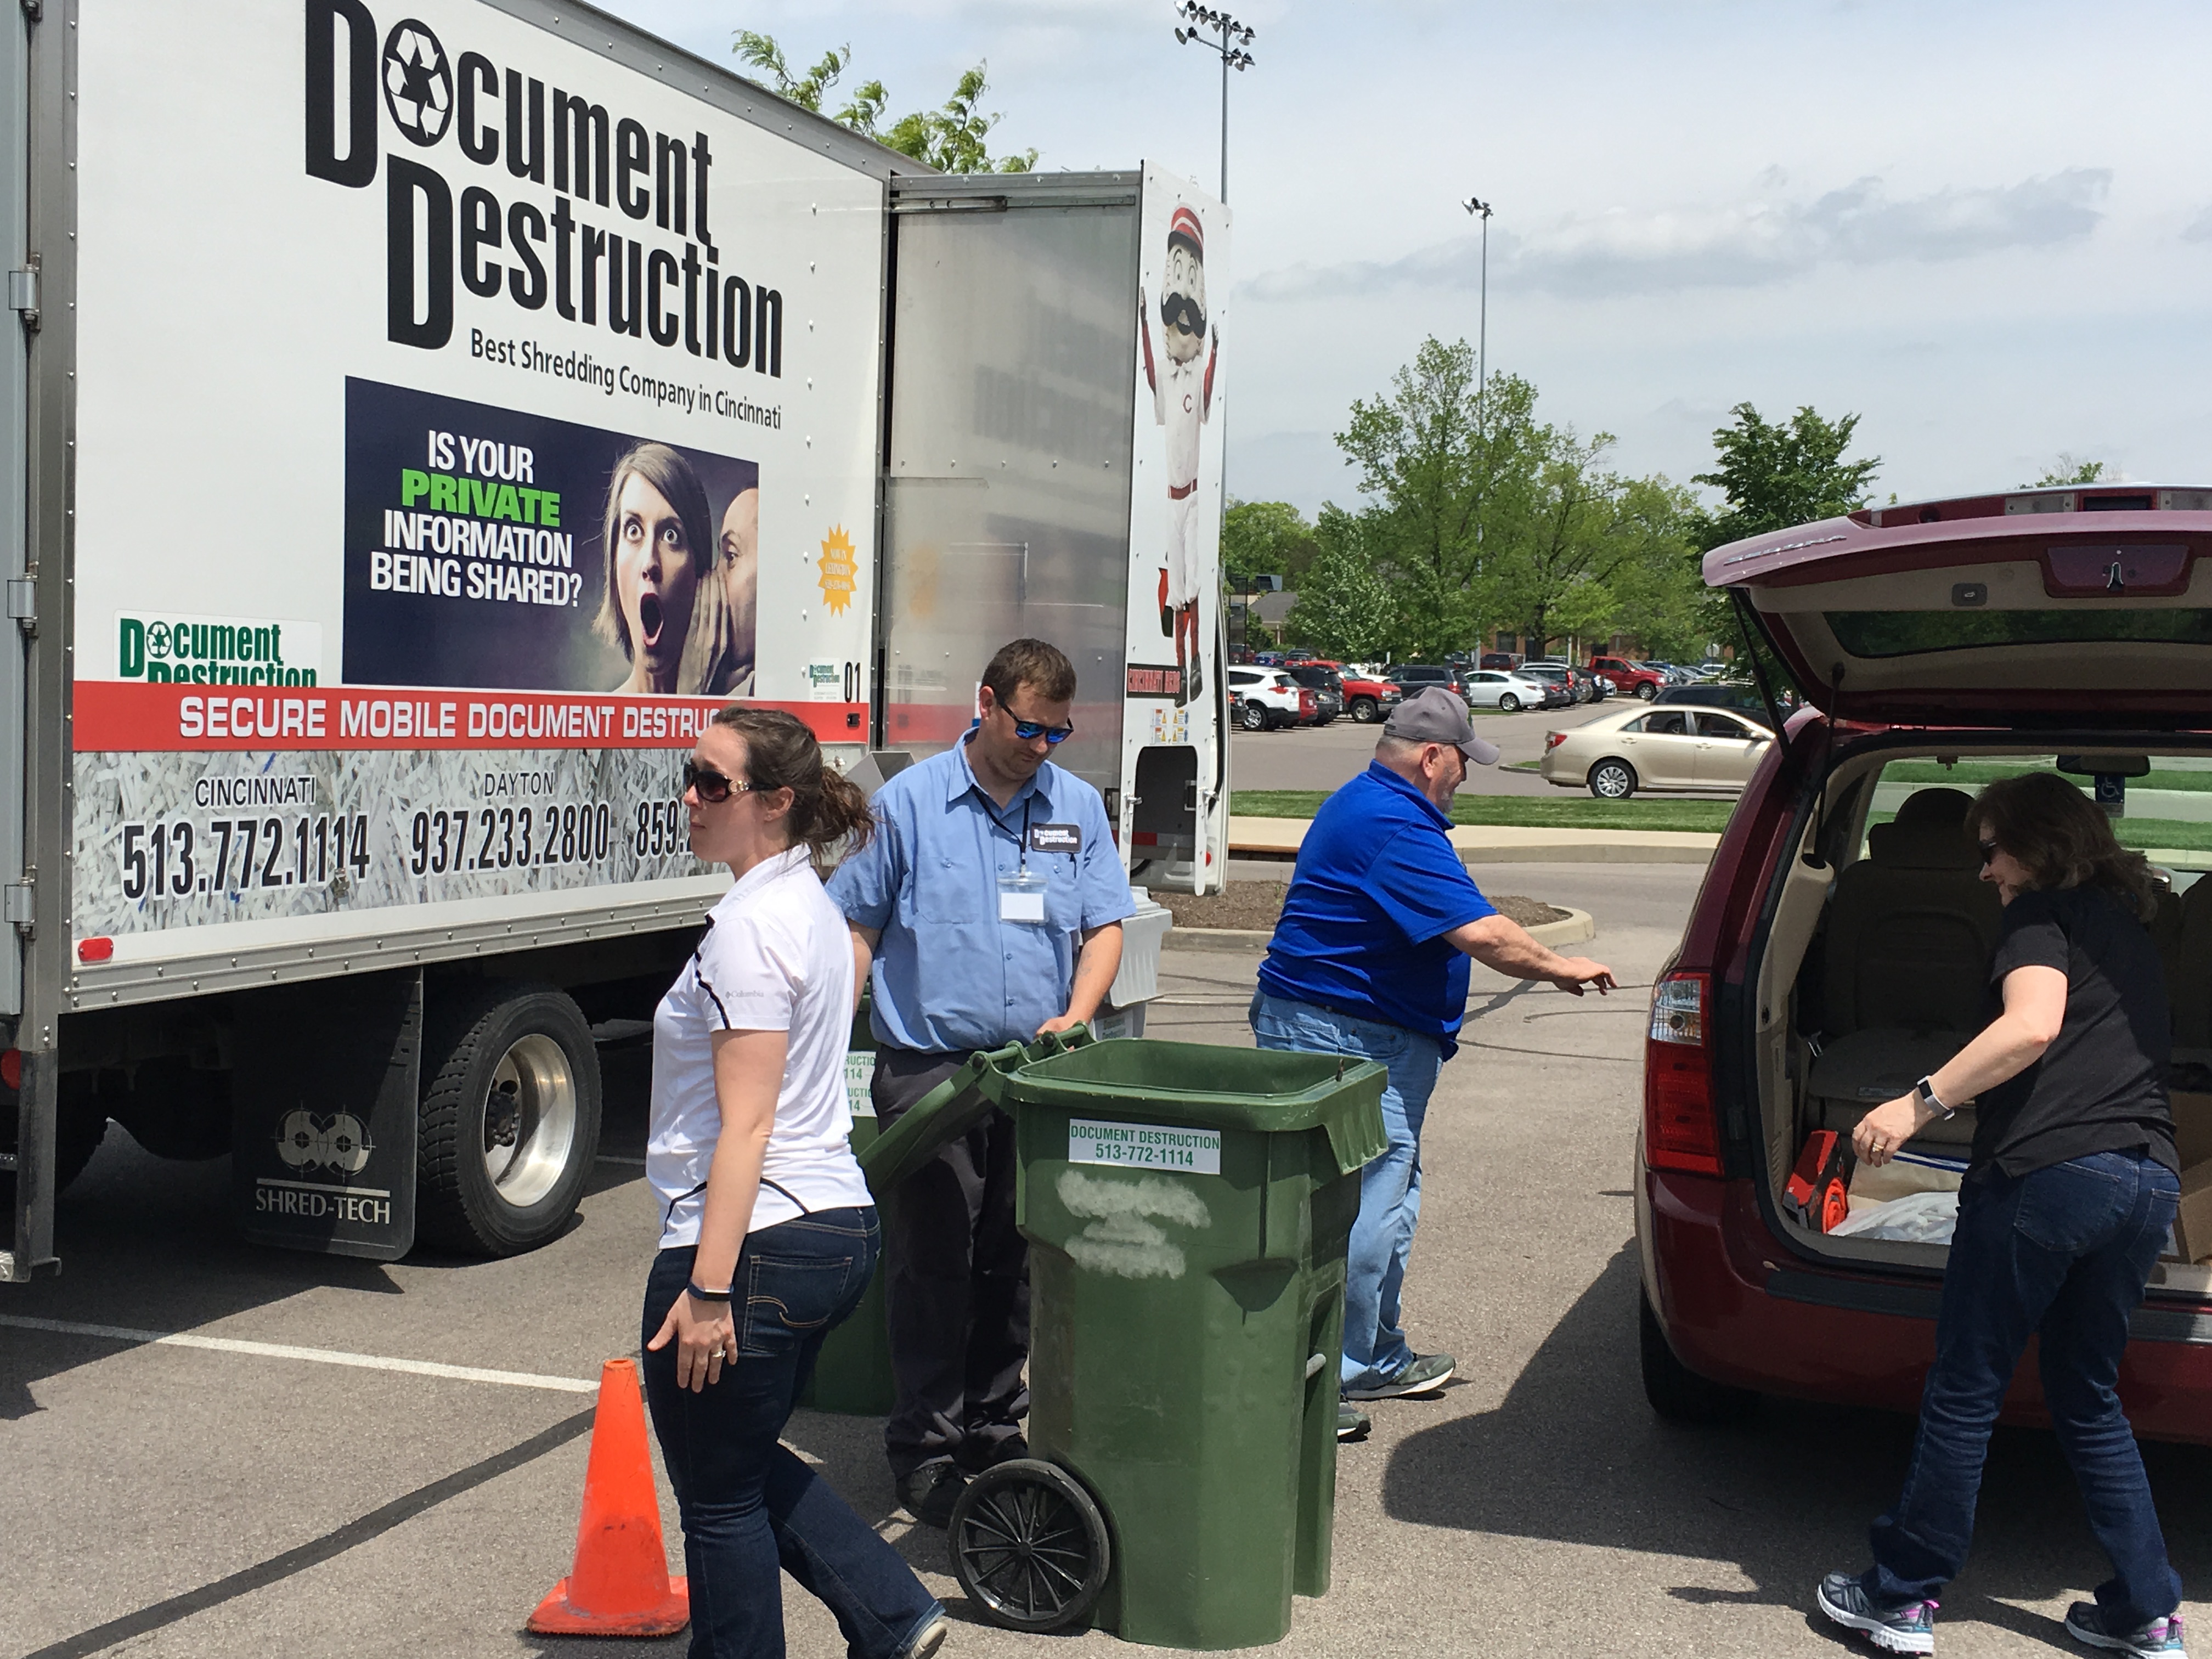 Volunteers helping to transfer documents for shredding from car to shred truck.